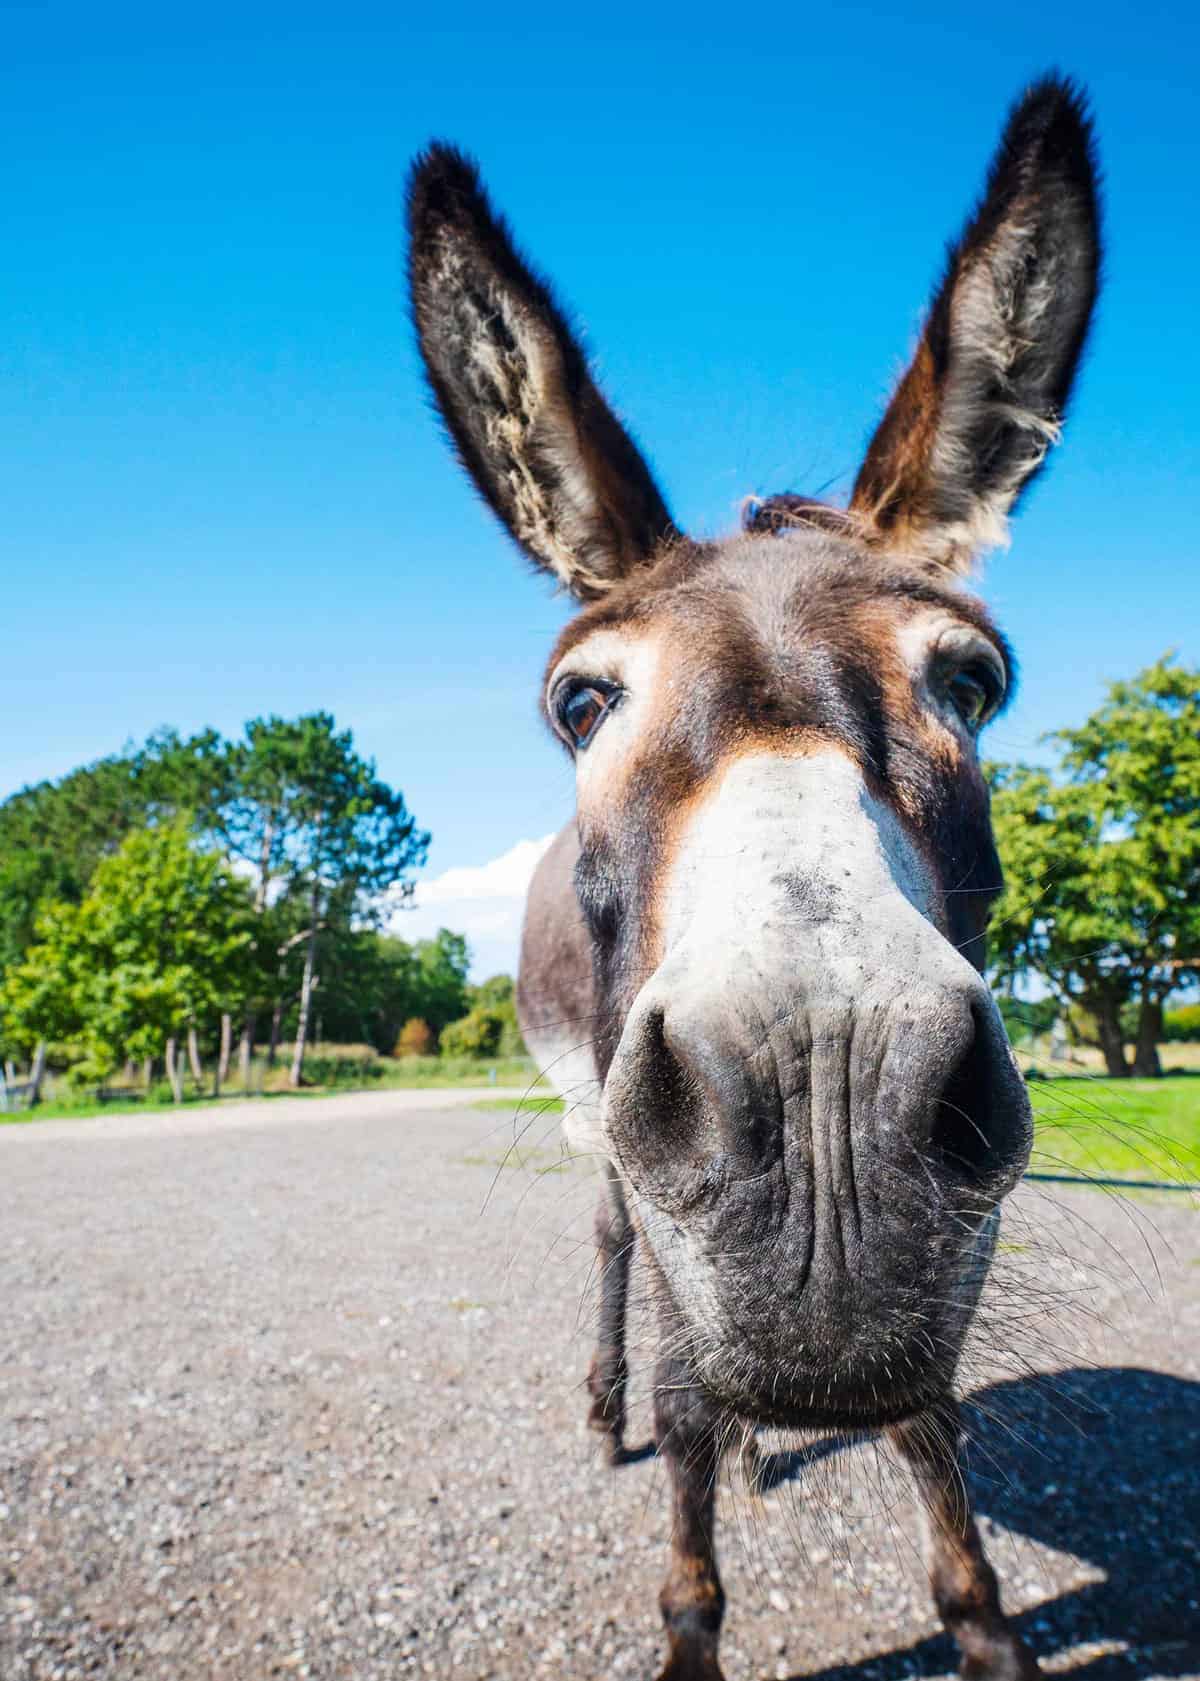 Facts about donkeys